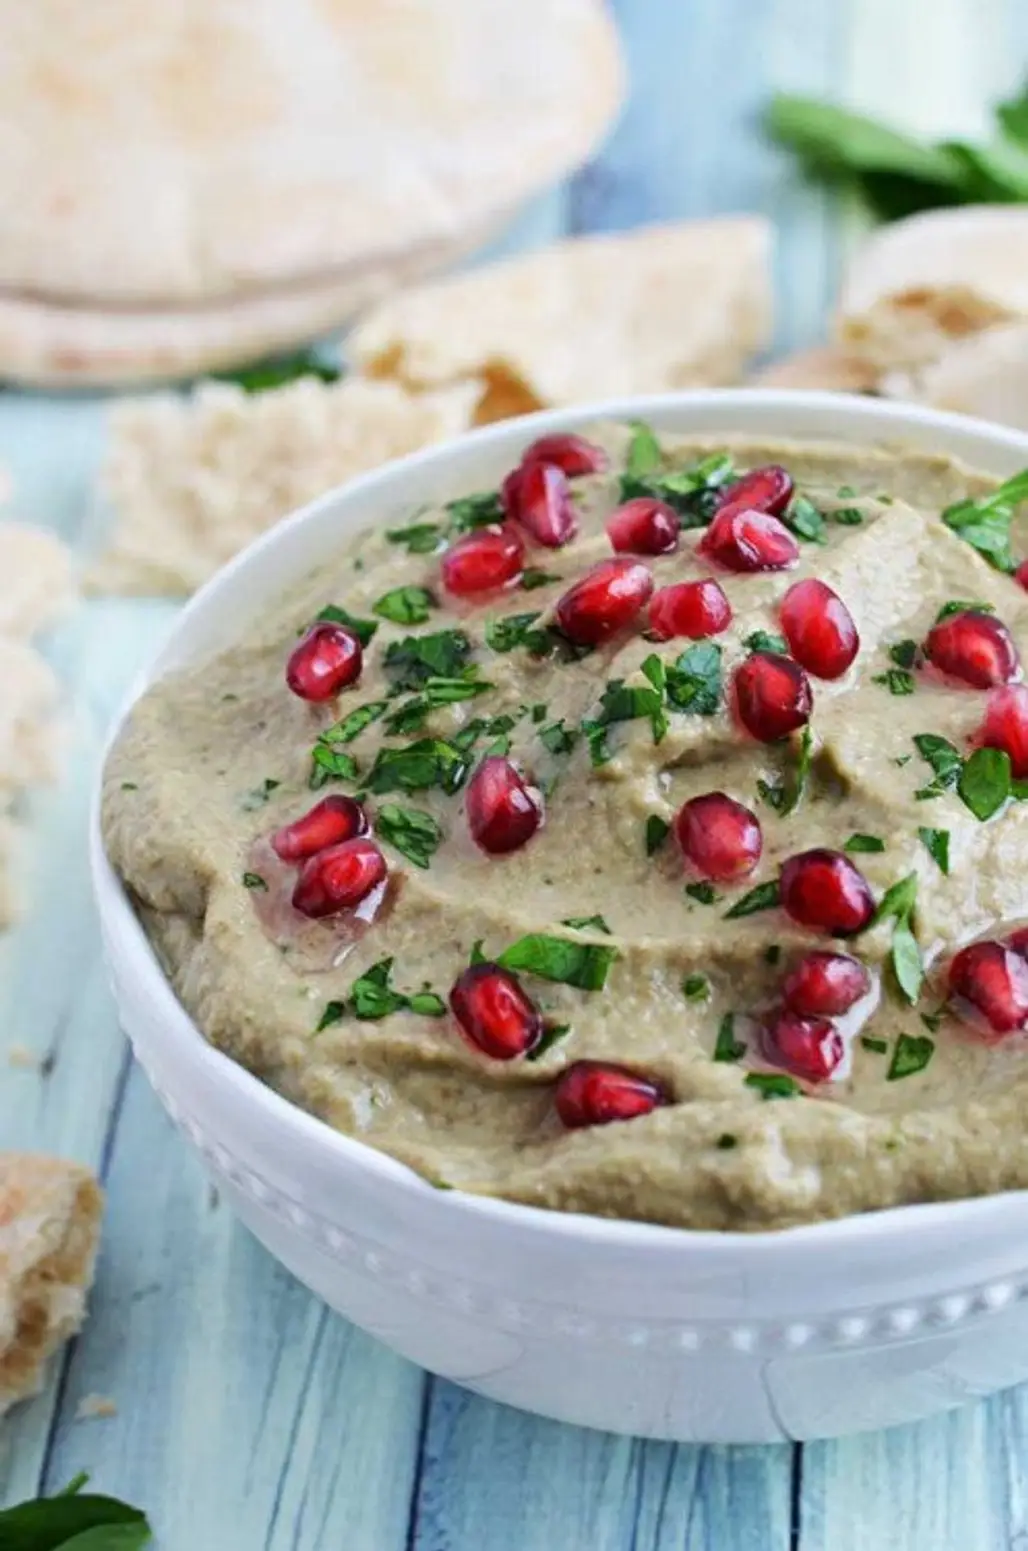 Try Baba Ghanoush Instead of Hummus